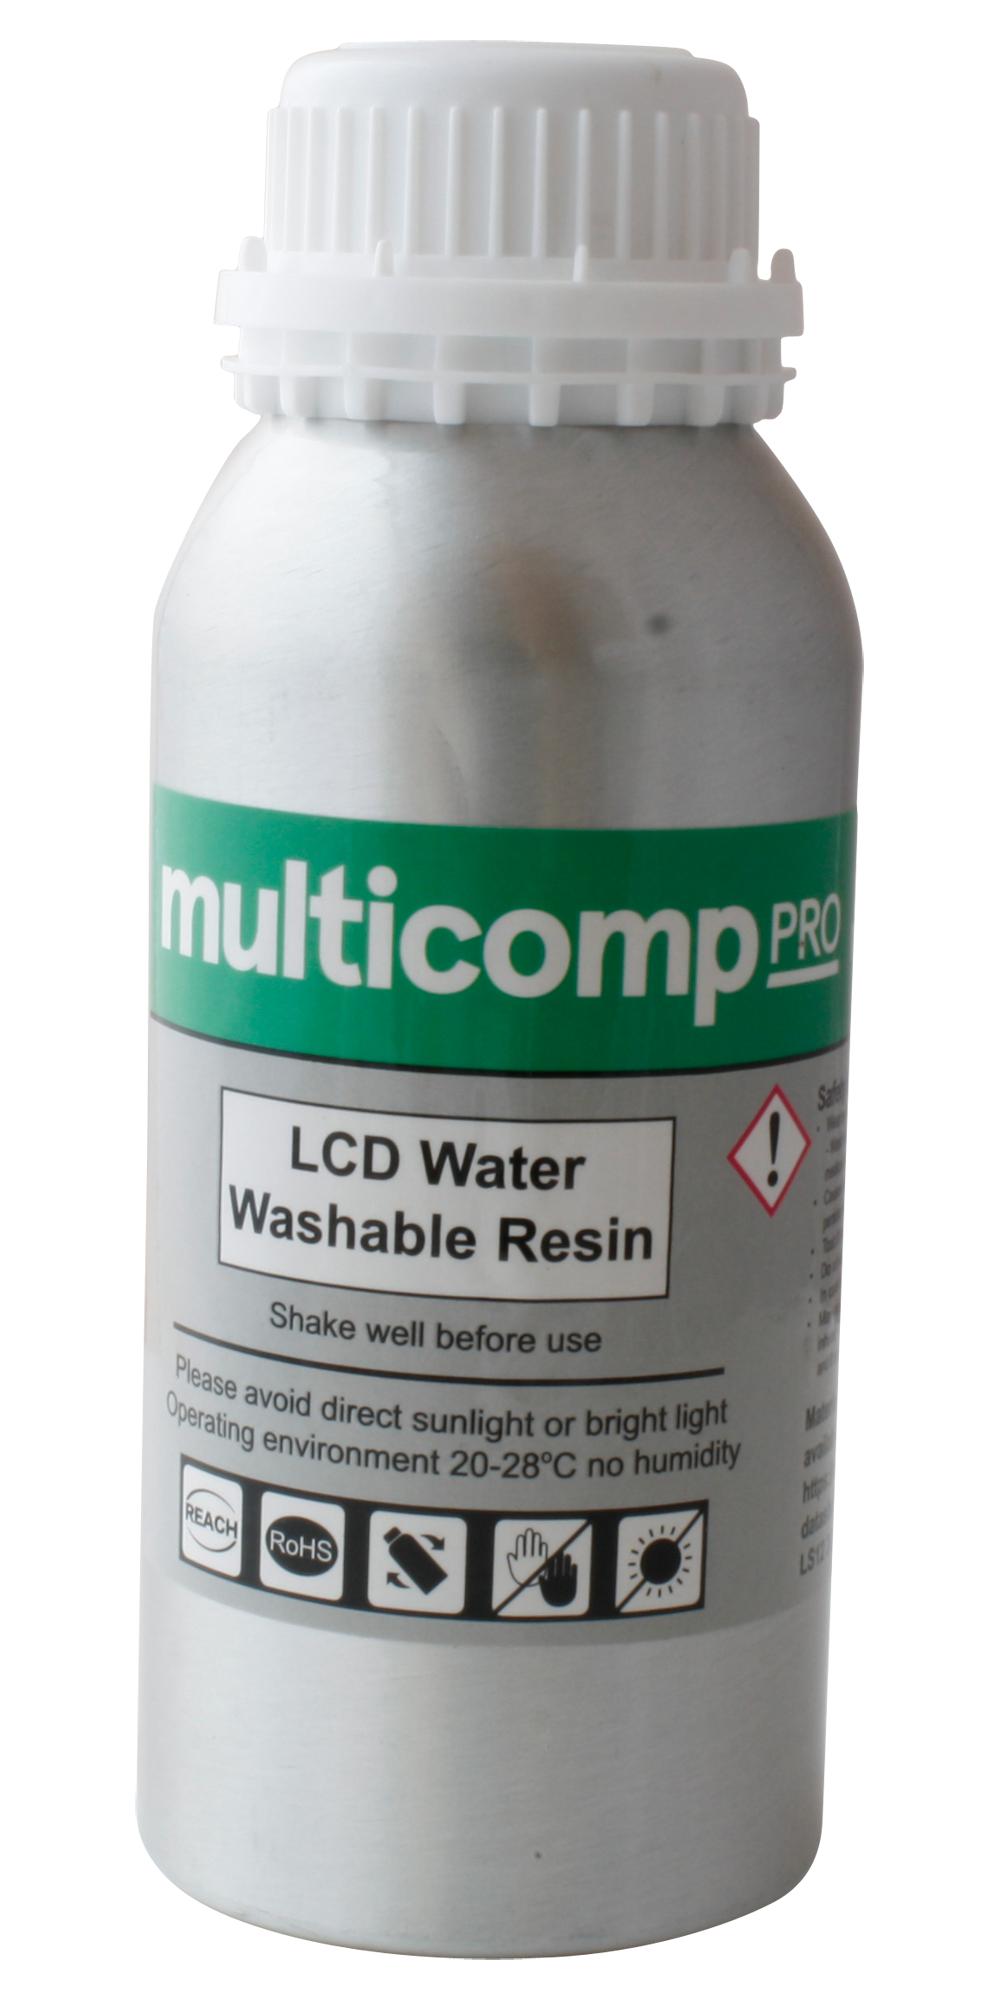 MP004402 LCD WATER WASHABLE RESIN, BLACK, 500G MULTICOMP PRO